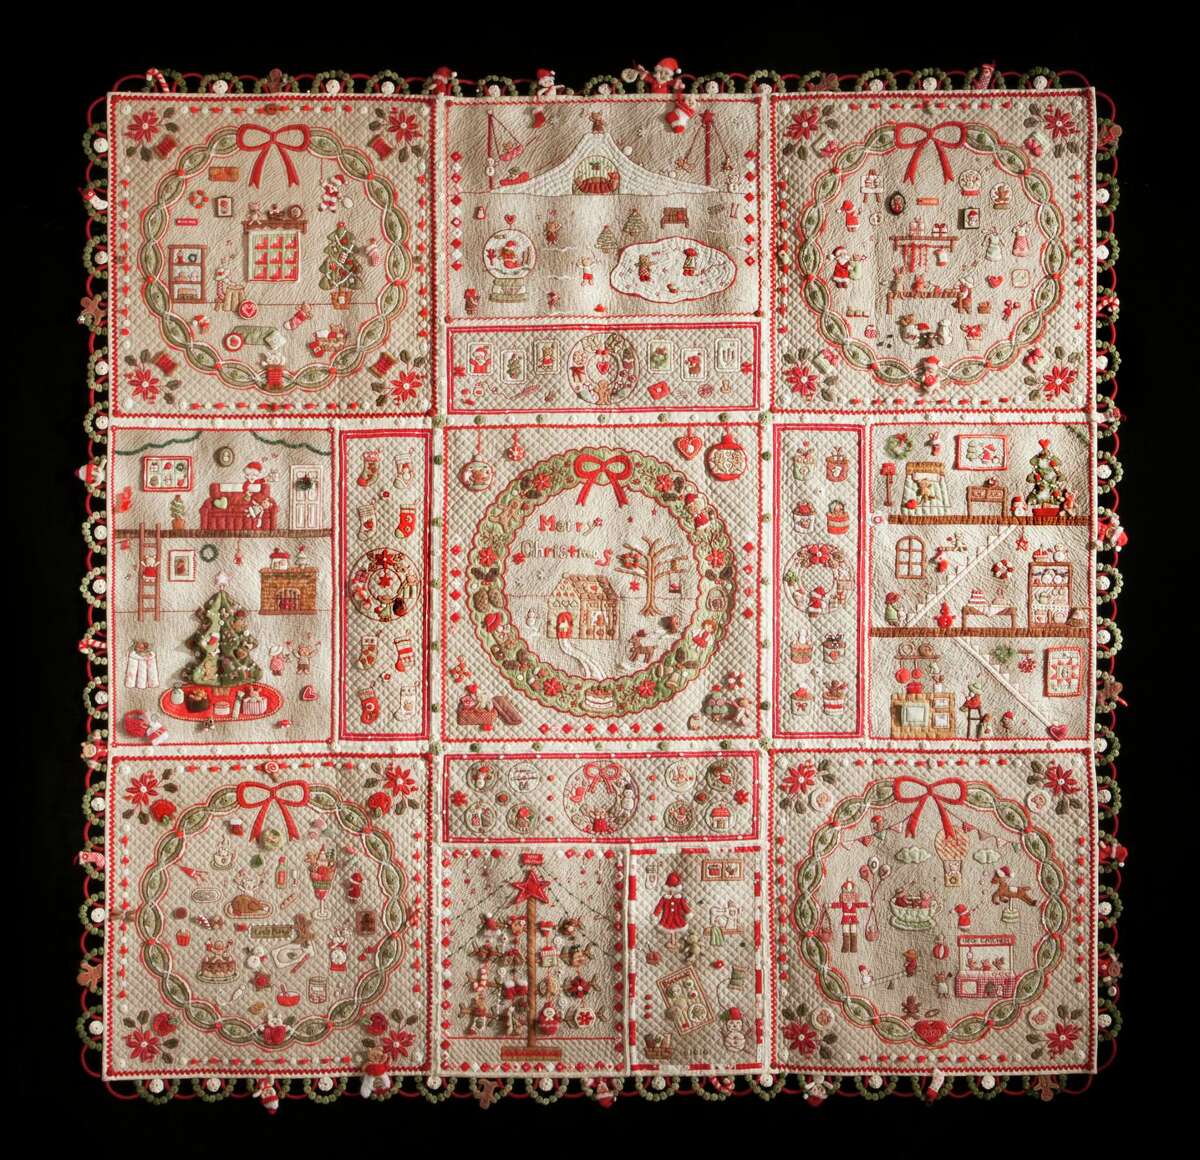 Aki Sakai of West Melbourne, Fla., won the Grace Company Master Awrd for Traditional Artistry and $5,000 for her quilt, "Merry Christmas." This 60-inch square quilt is her second Christmas quilt and took about a year to make it.